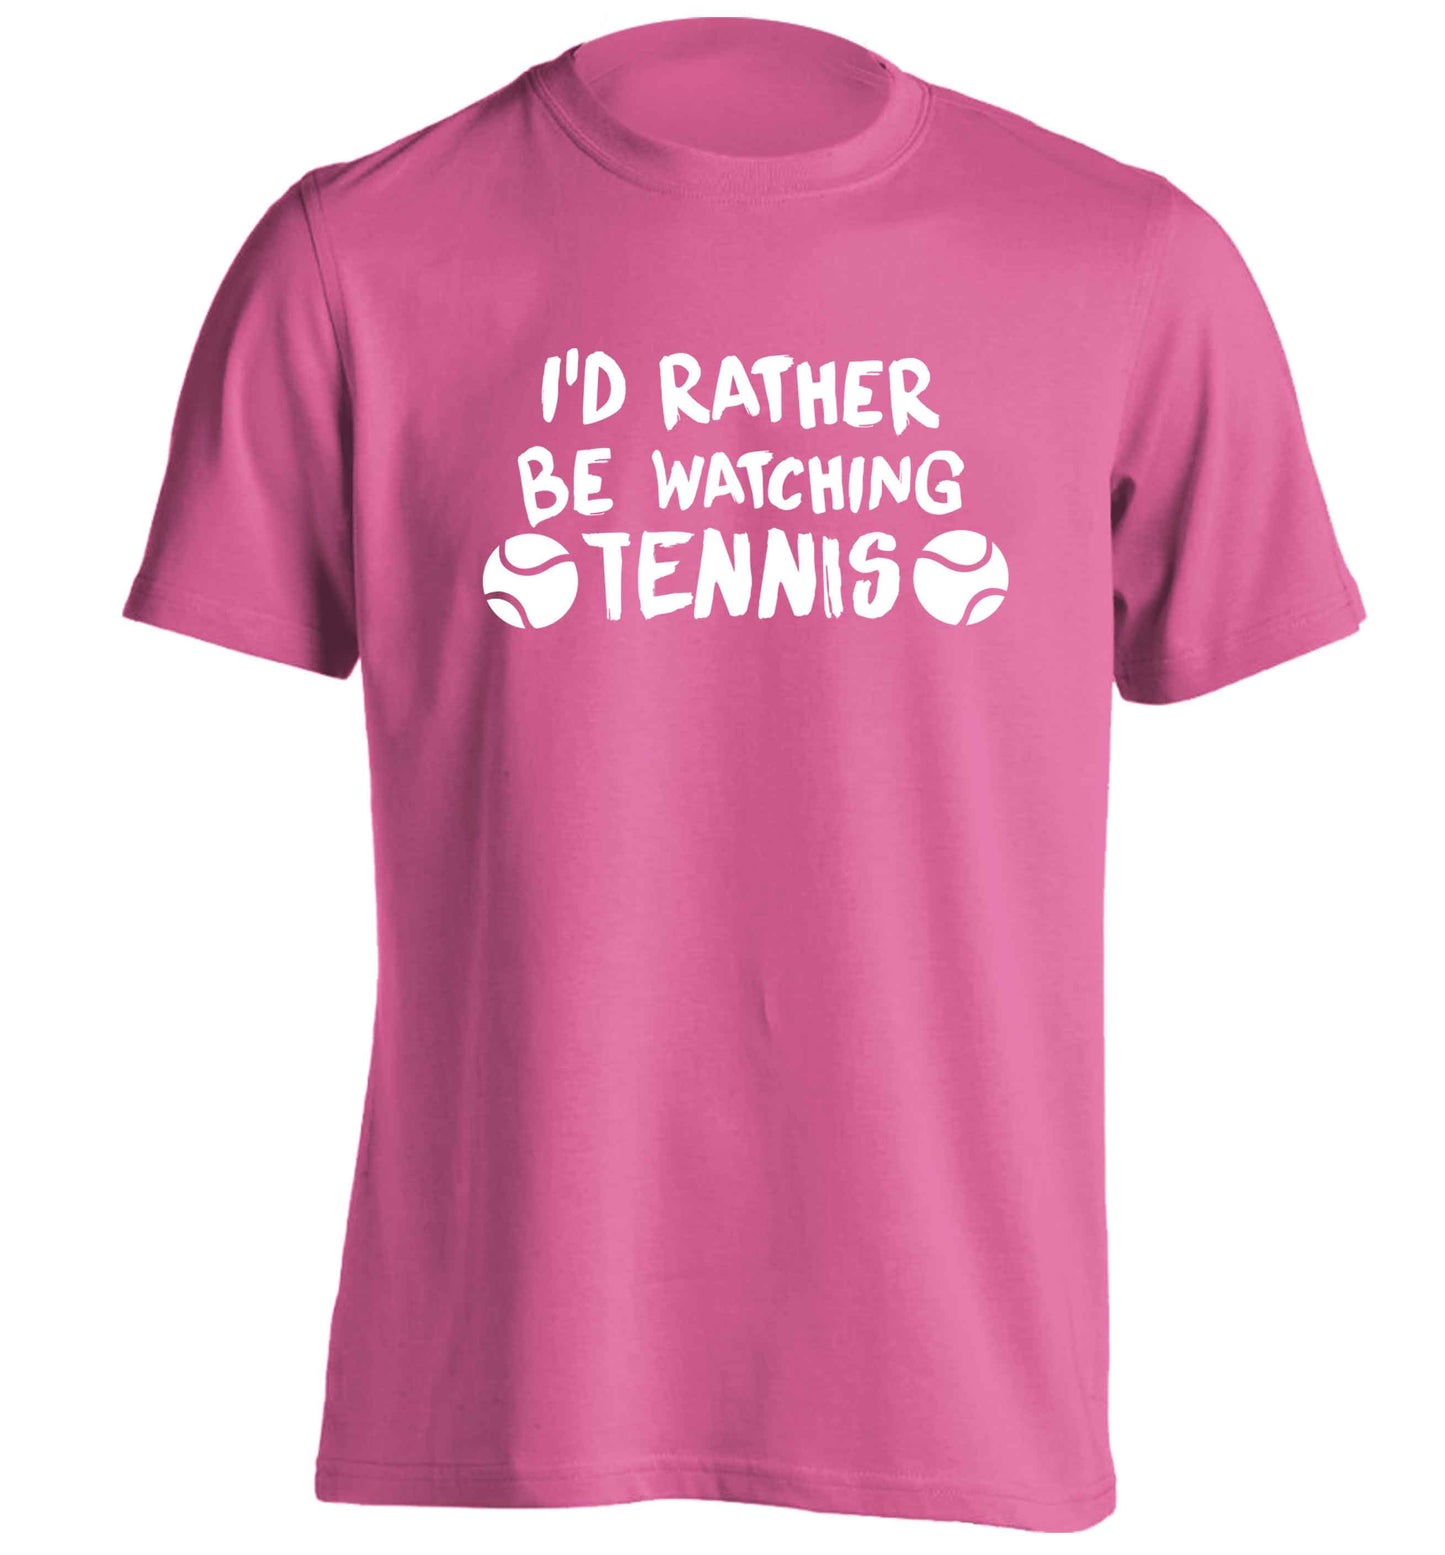 I'd rather be watching the tennis adults unisex pink Tshirt 2XL